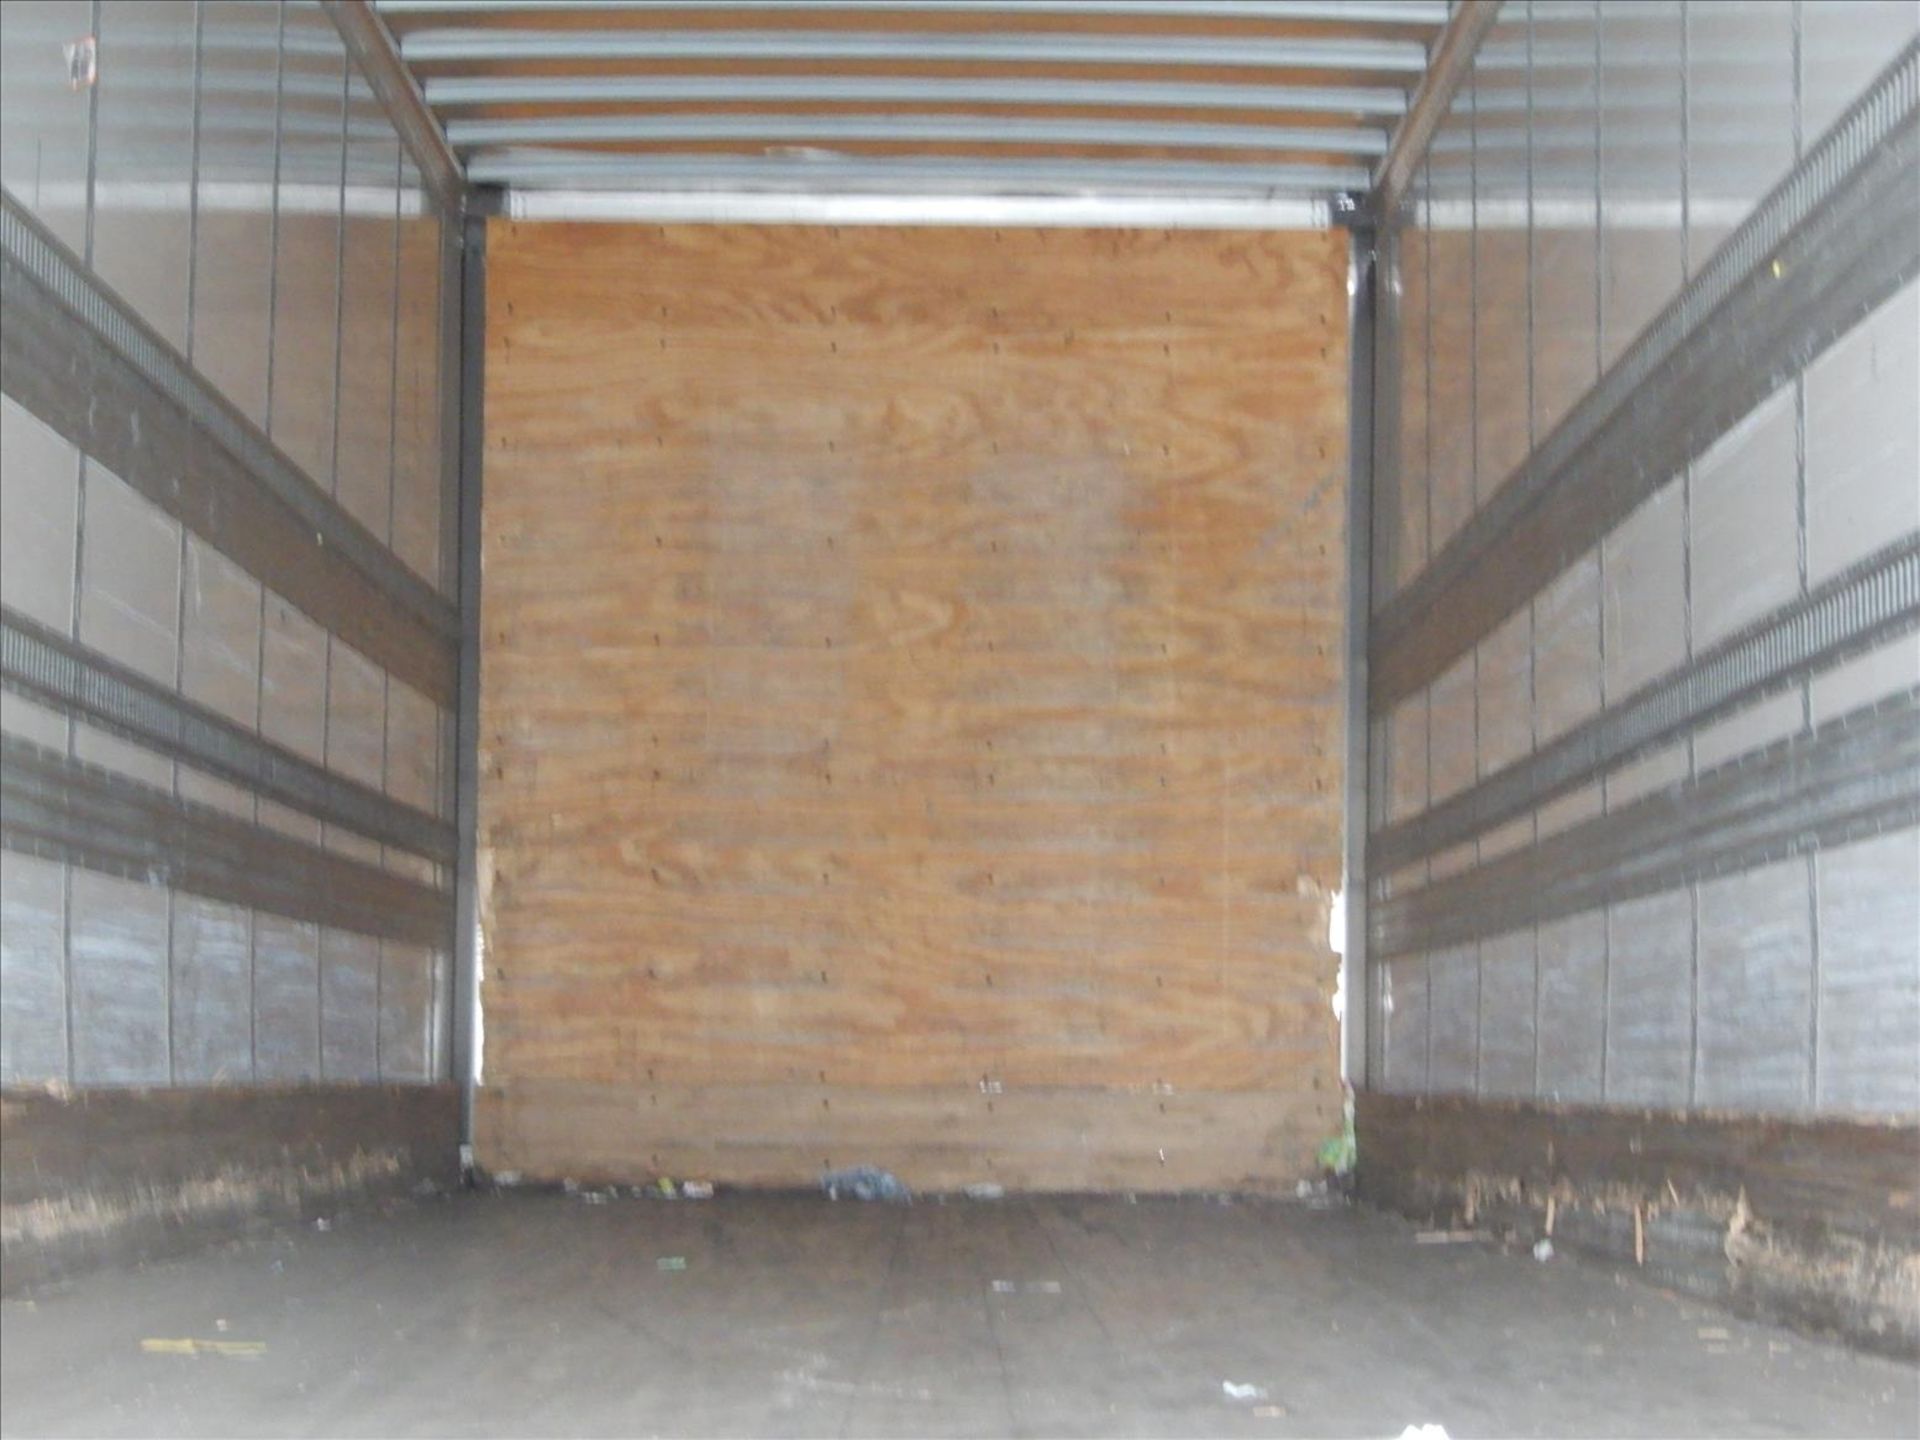 2012 Stoughton Trailer - Located in Indianapolis, IN - Image 29 of 33